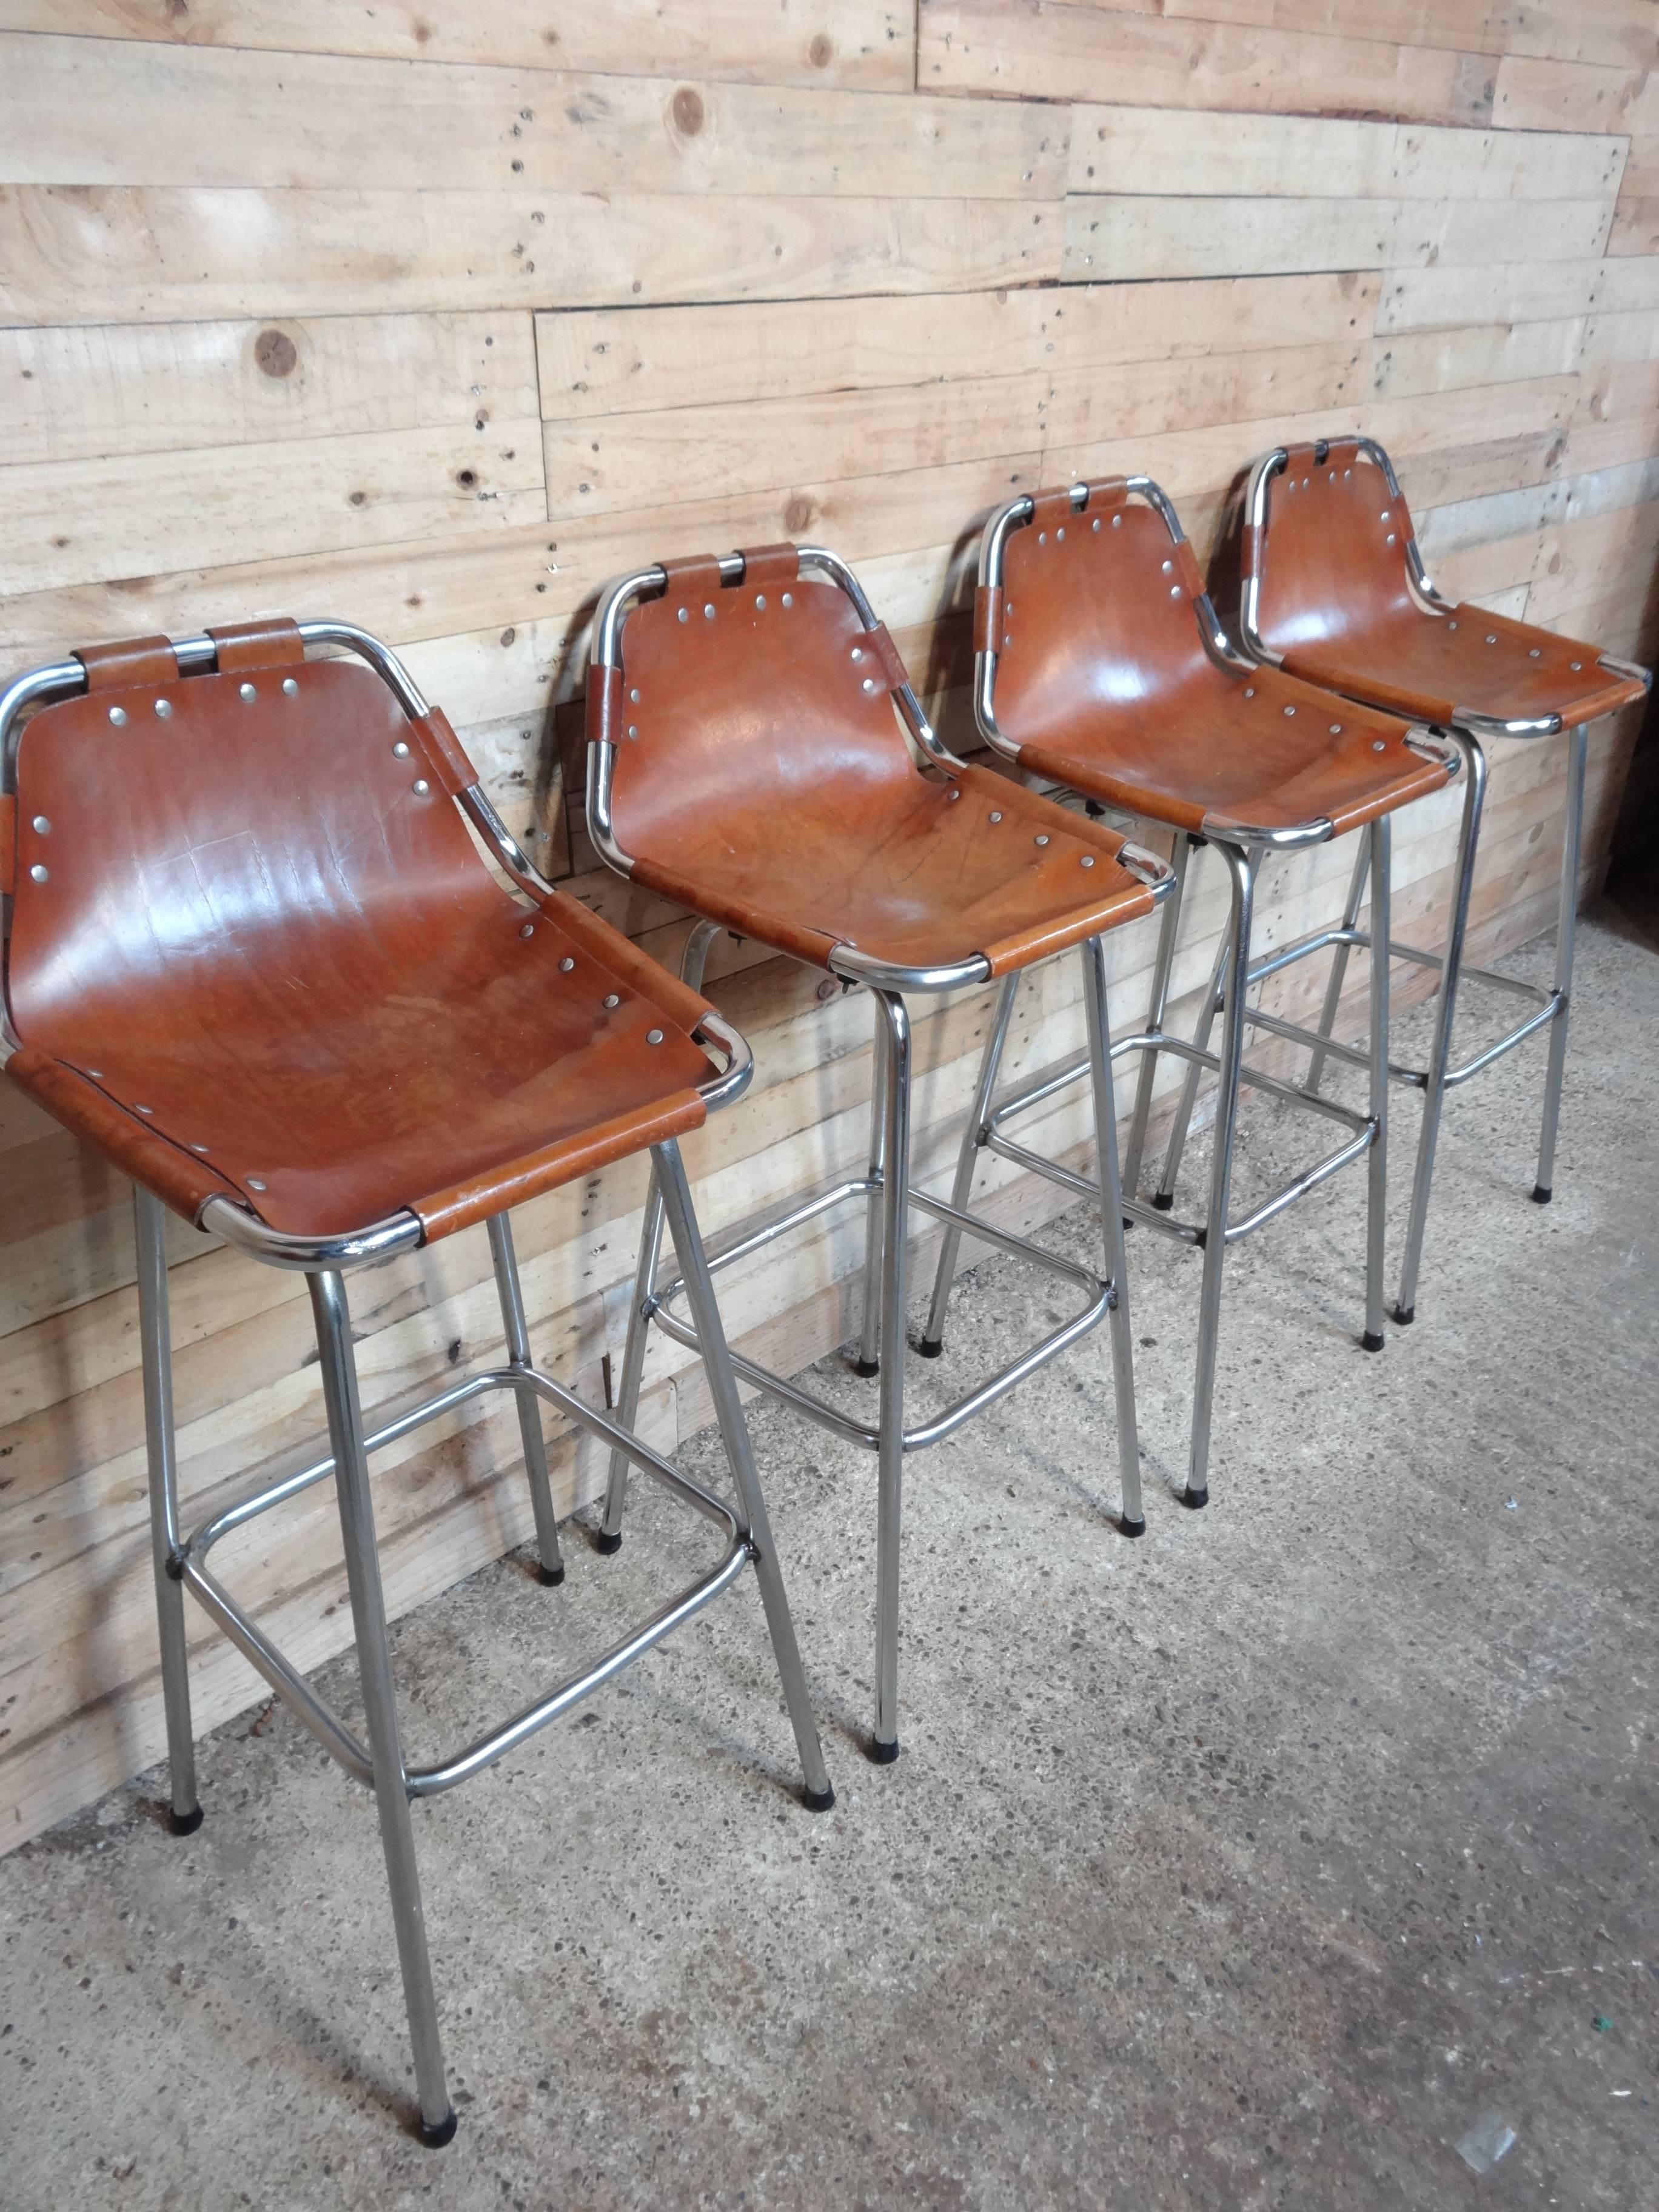 Stunning set of four stools, designer Charlotte Perriand used these in the Ski Resort Les Arcs, circa 1960. These stools were commissioned to be made by Cassina, one of the best Italian furniture maker’s very nice chrome tubular frame with thick